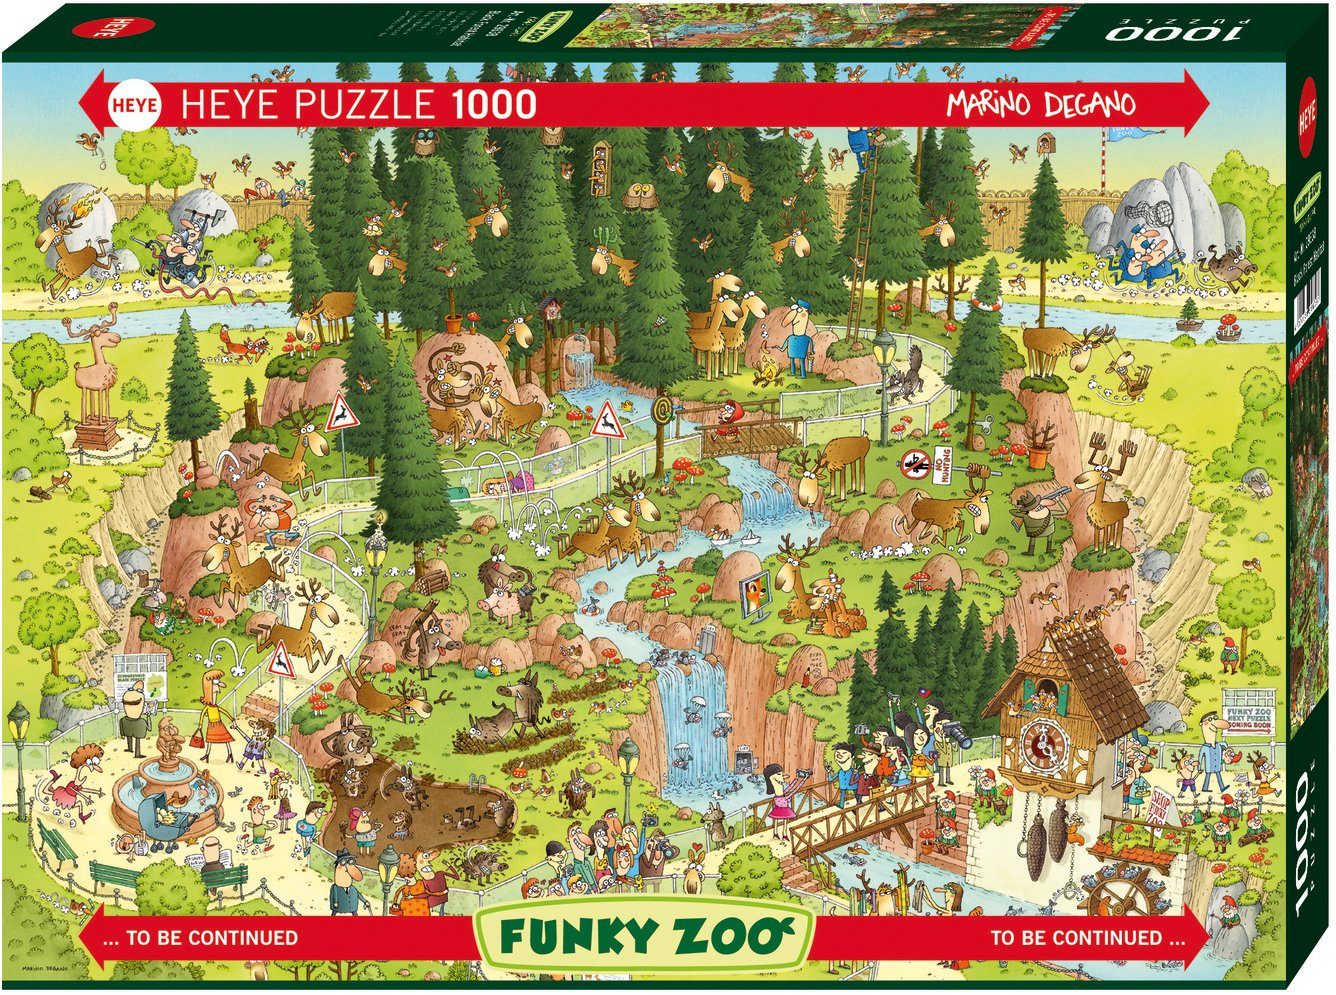 HEYE Puzzle Black Forest Habitat, 1000 Puzzleteile, Made in Germany